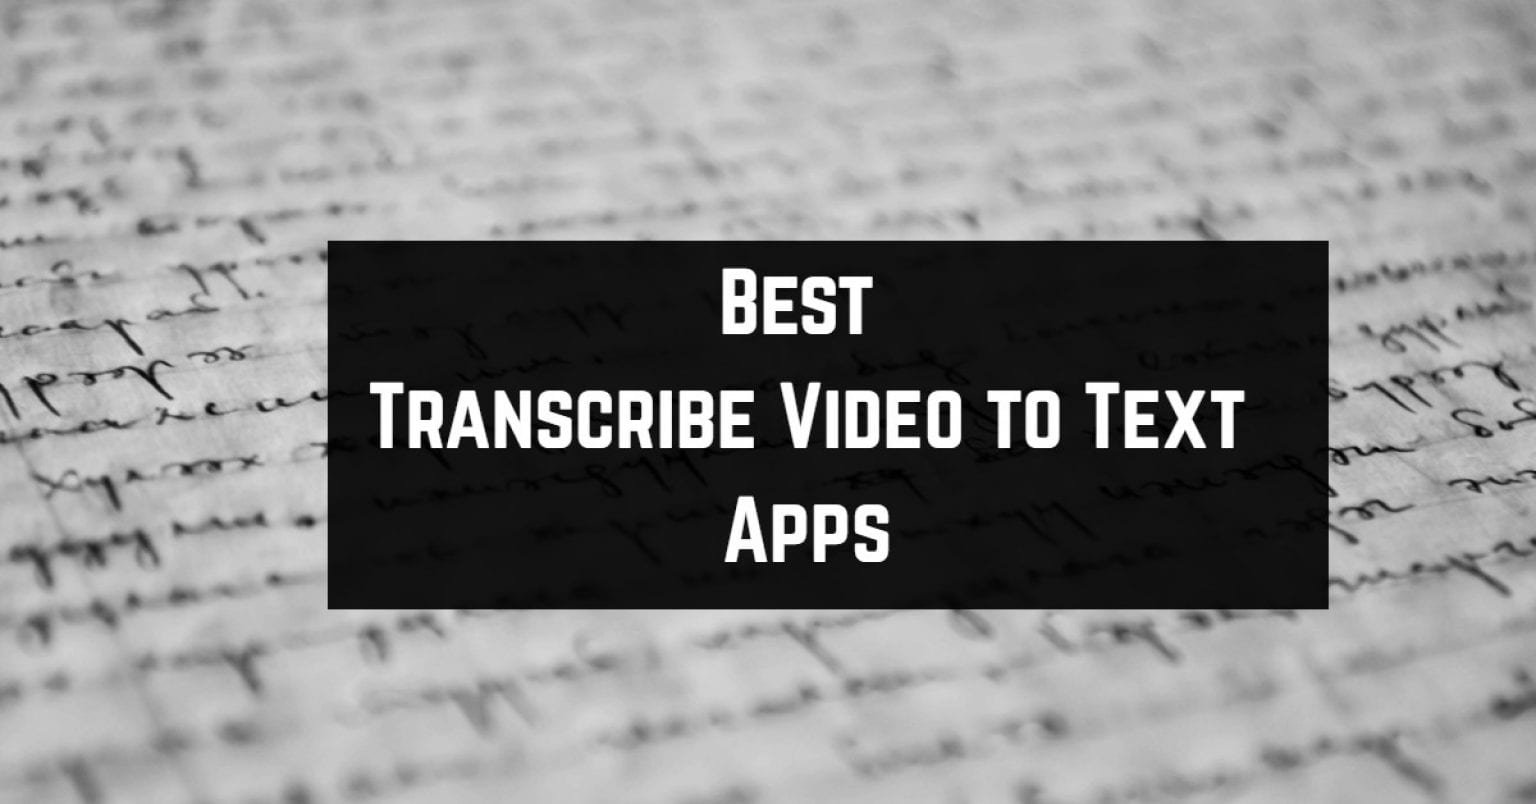 download the last version for ios Transcribe 9.30.1